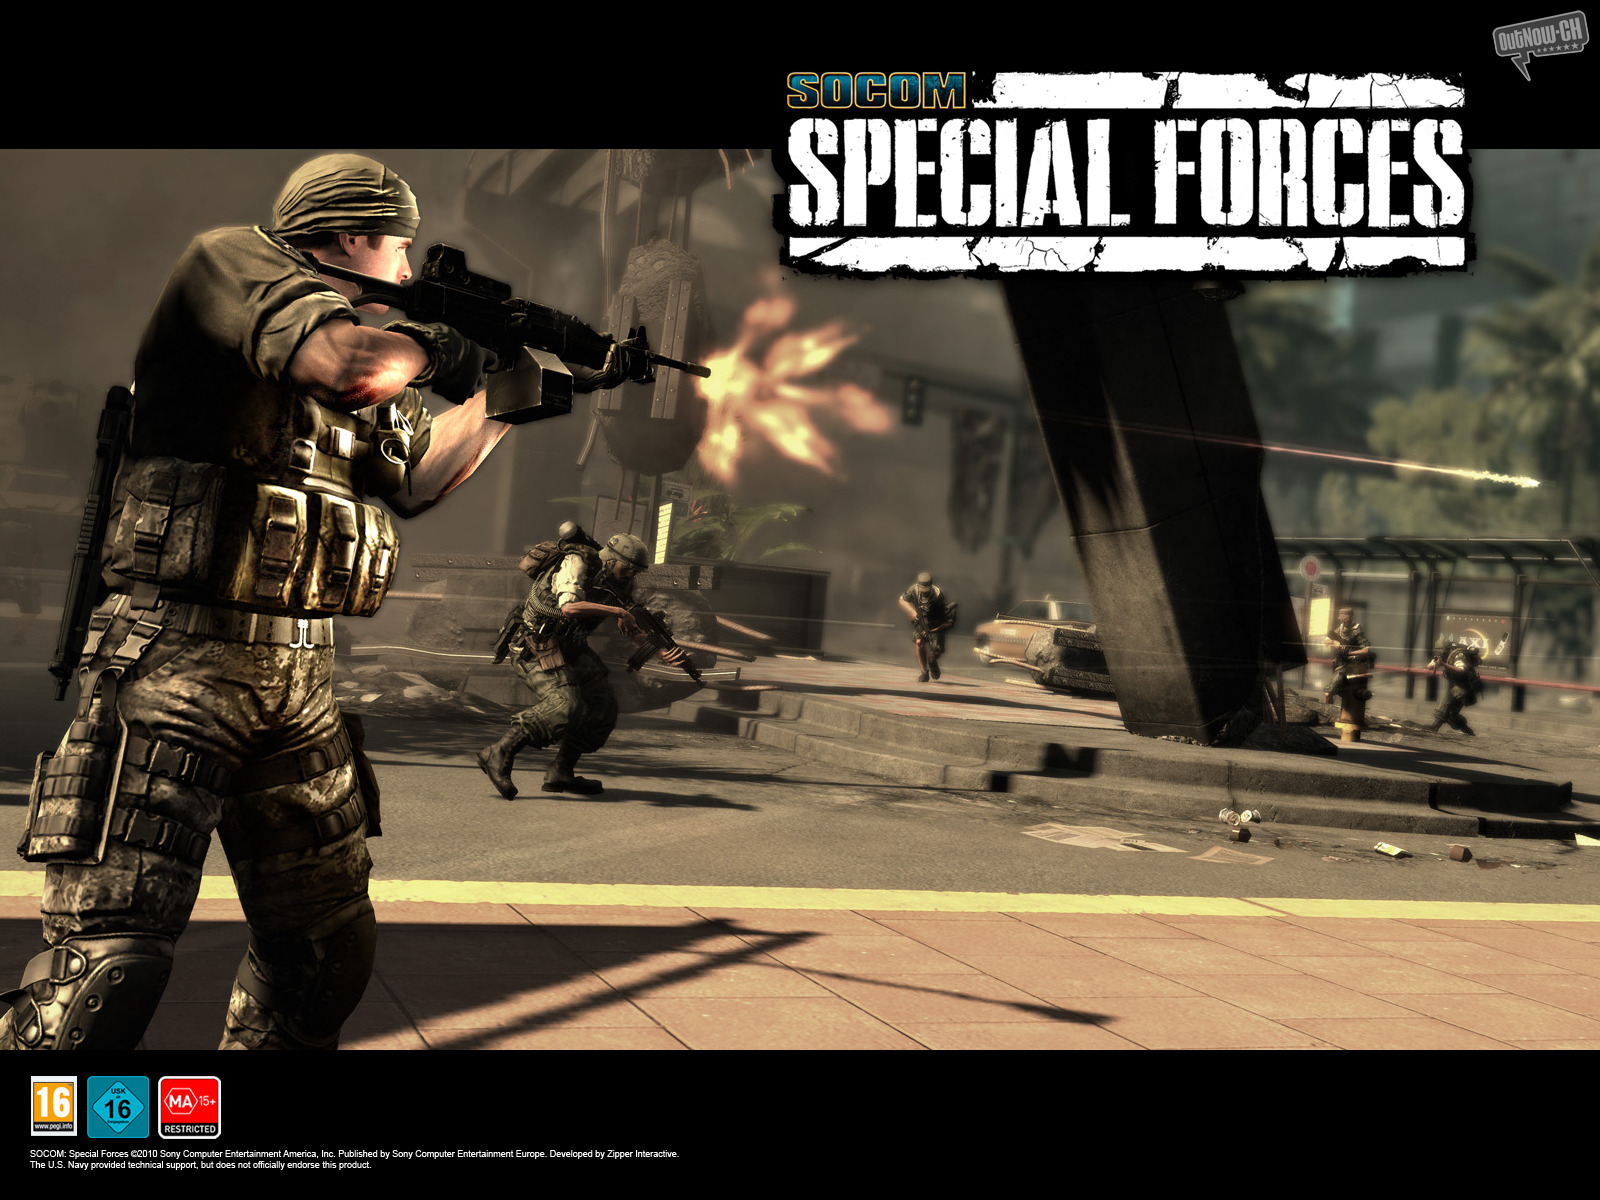 Video Game SOCOM: Special Forces Wallpaper